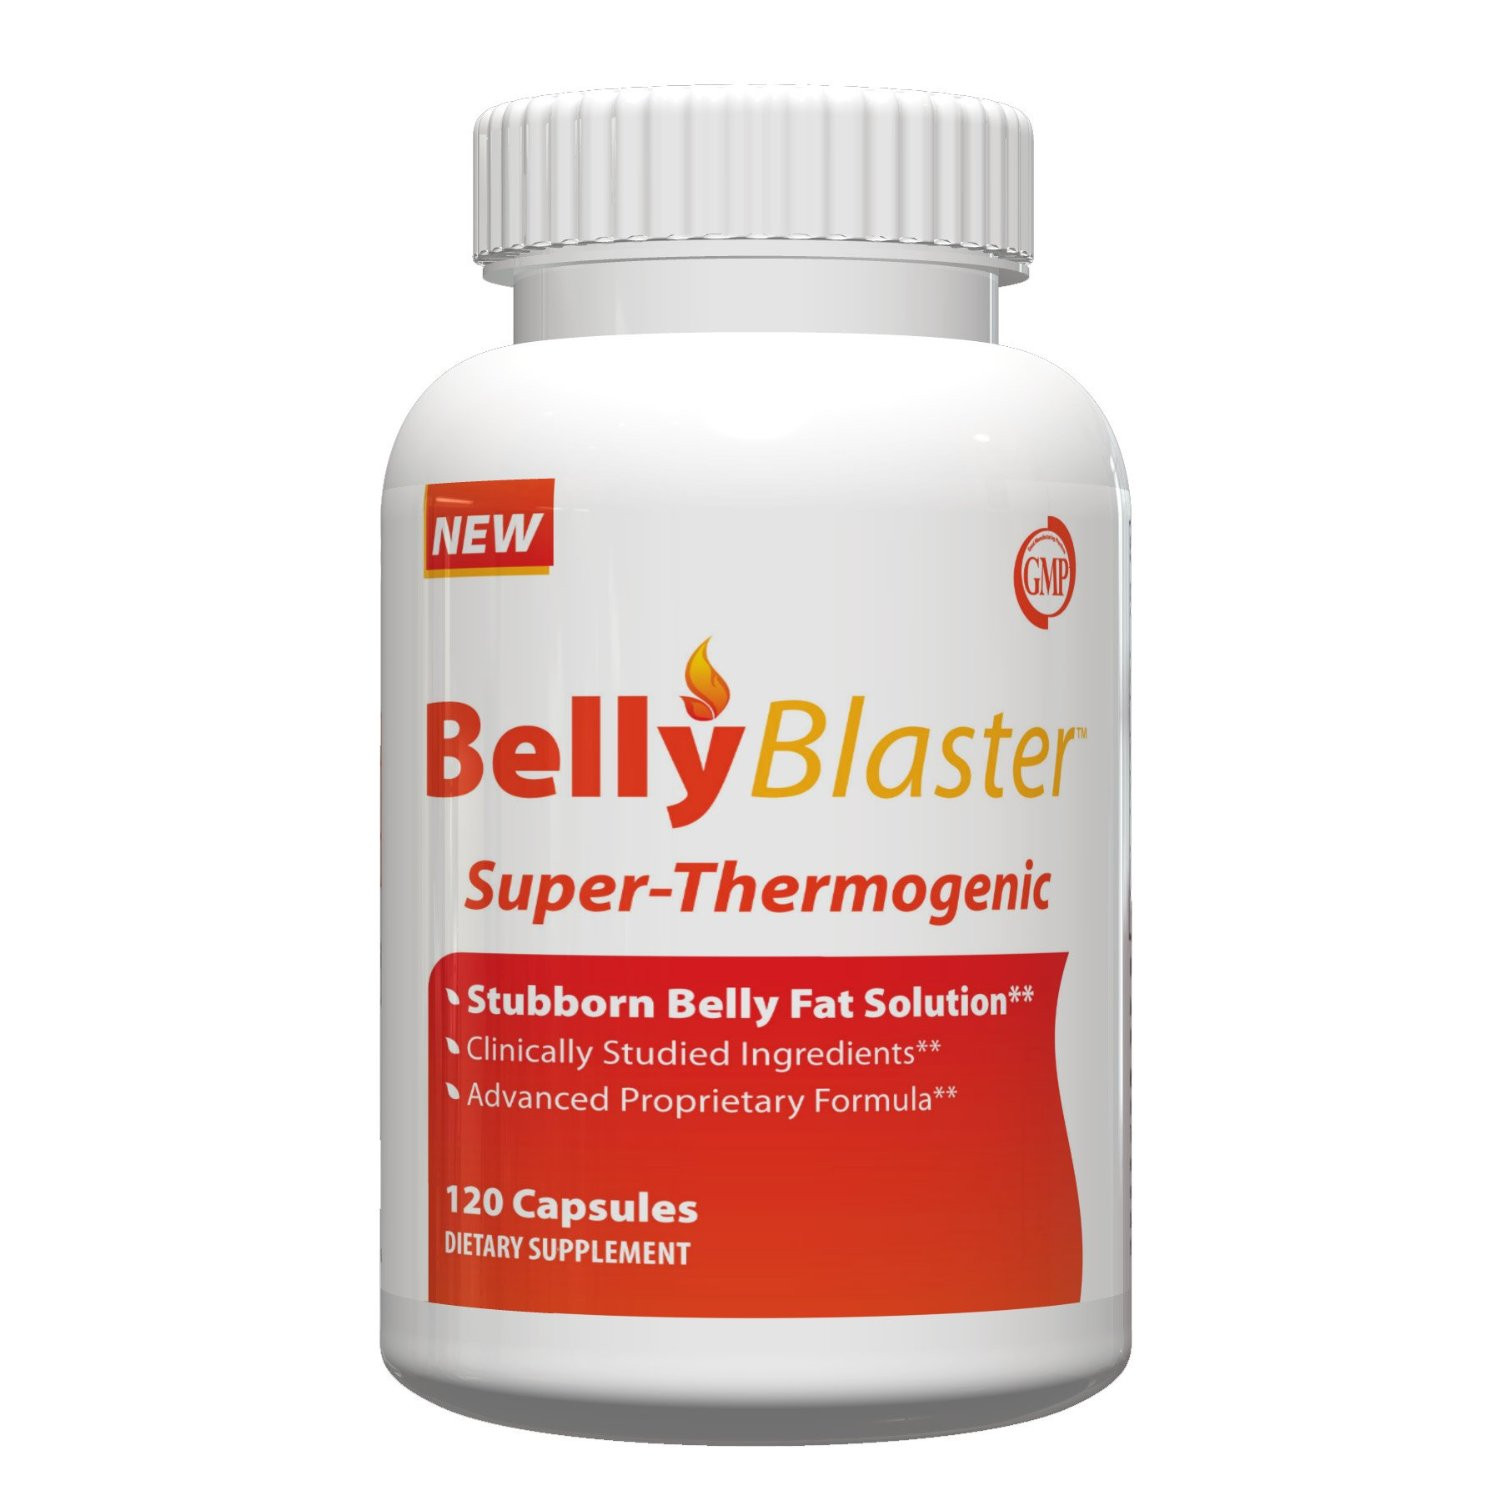 Weight Loss Supplements For Women Fat Burning Lose Belly
 Belly fat burning pills michelle bridges 12 week total